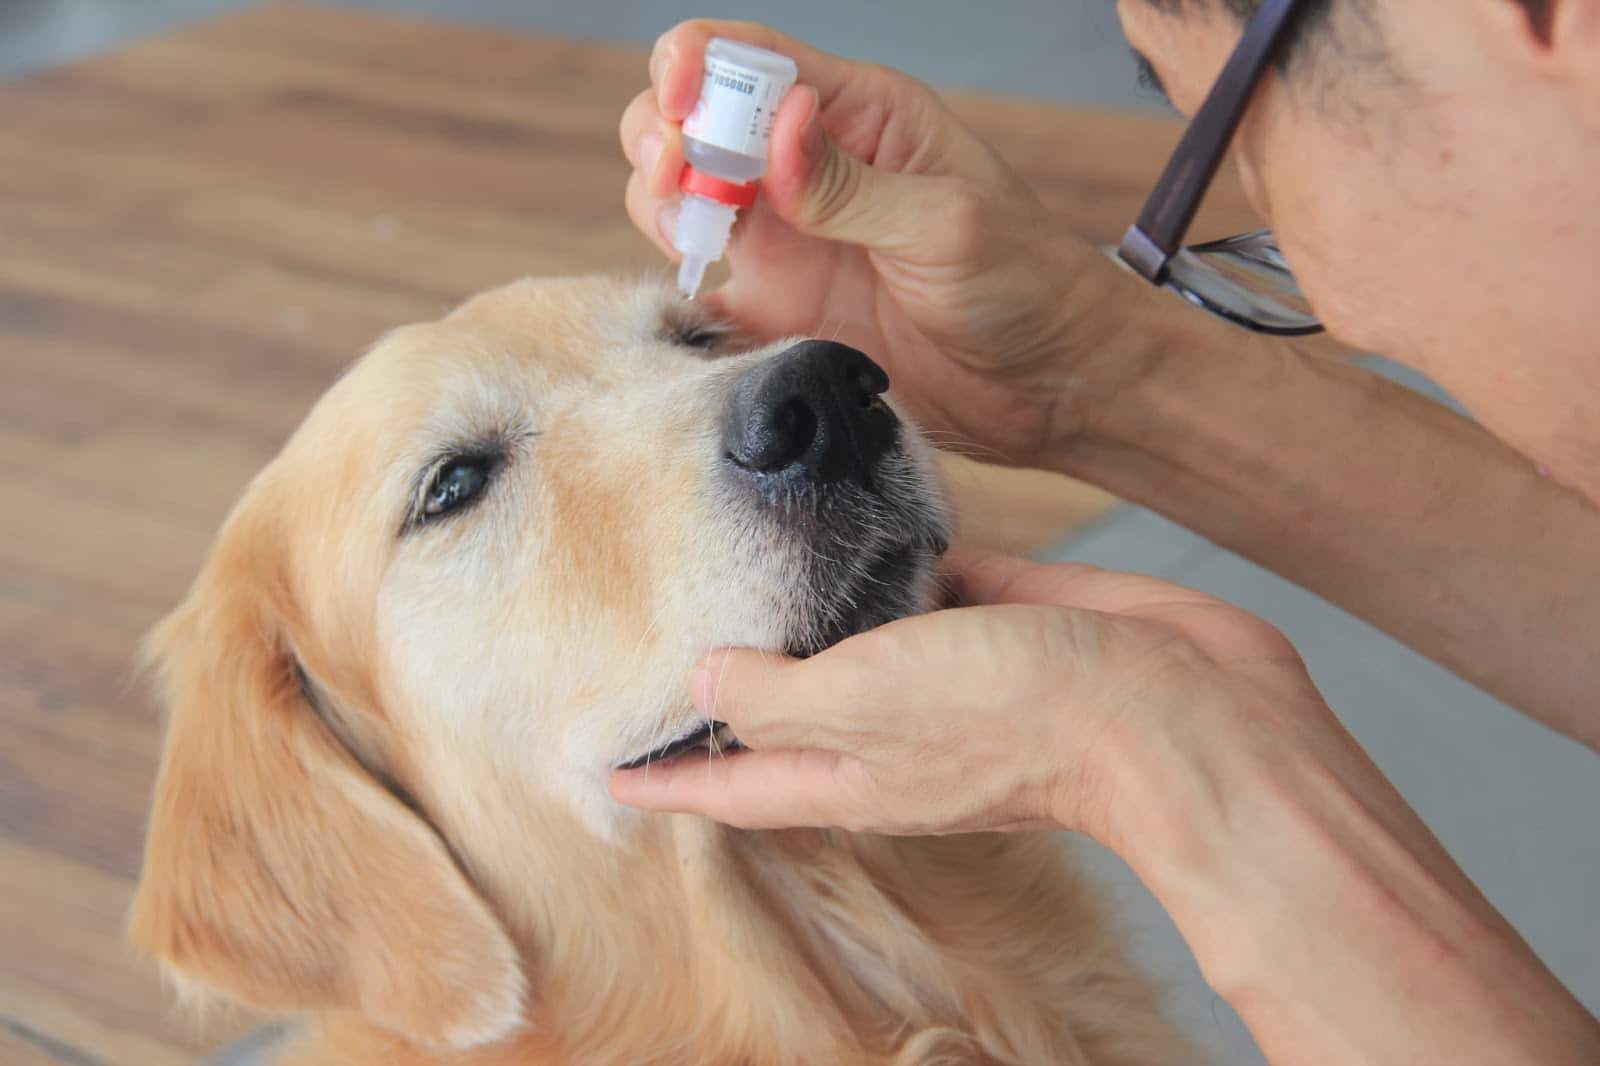 How To Safely Rinse A Dog's Eye